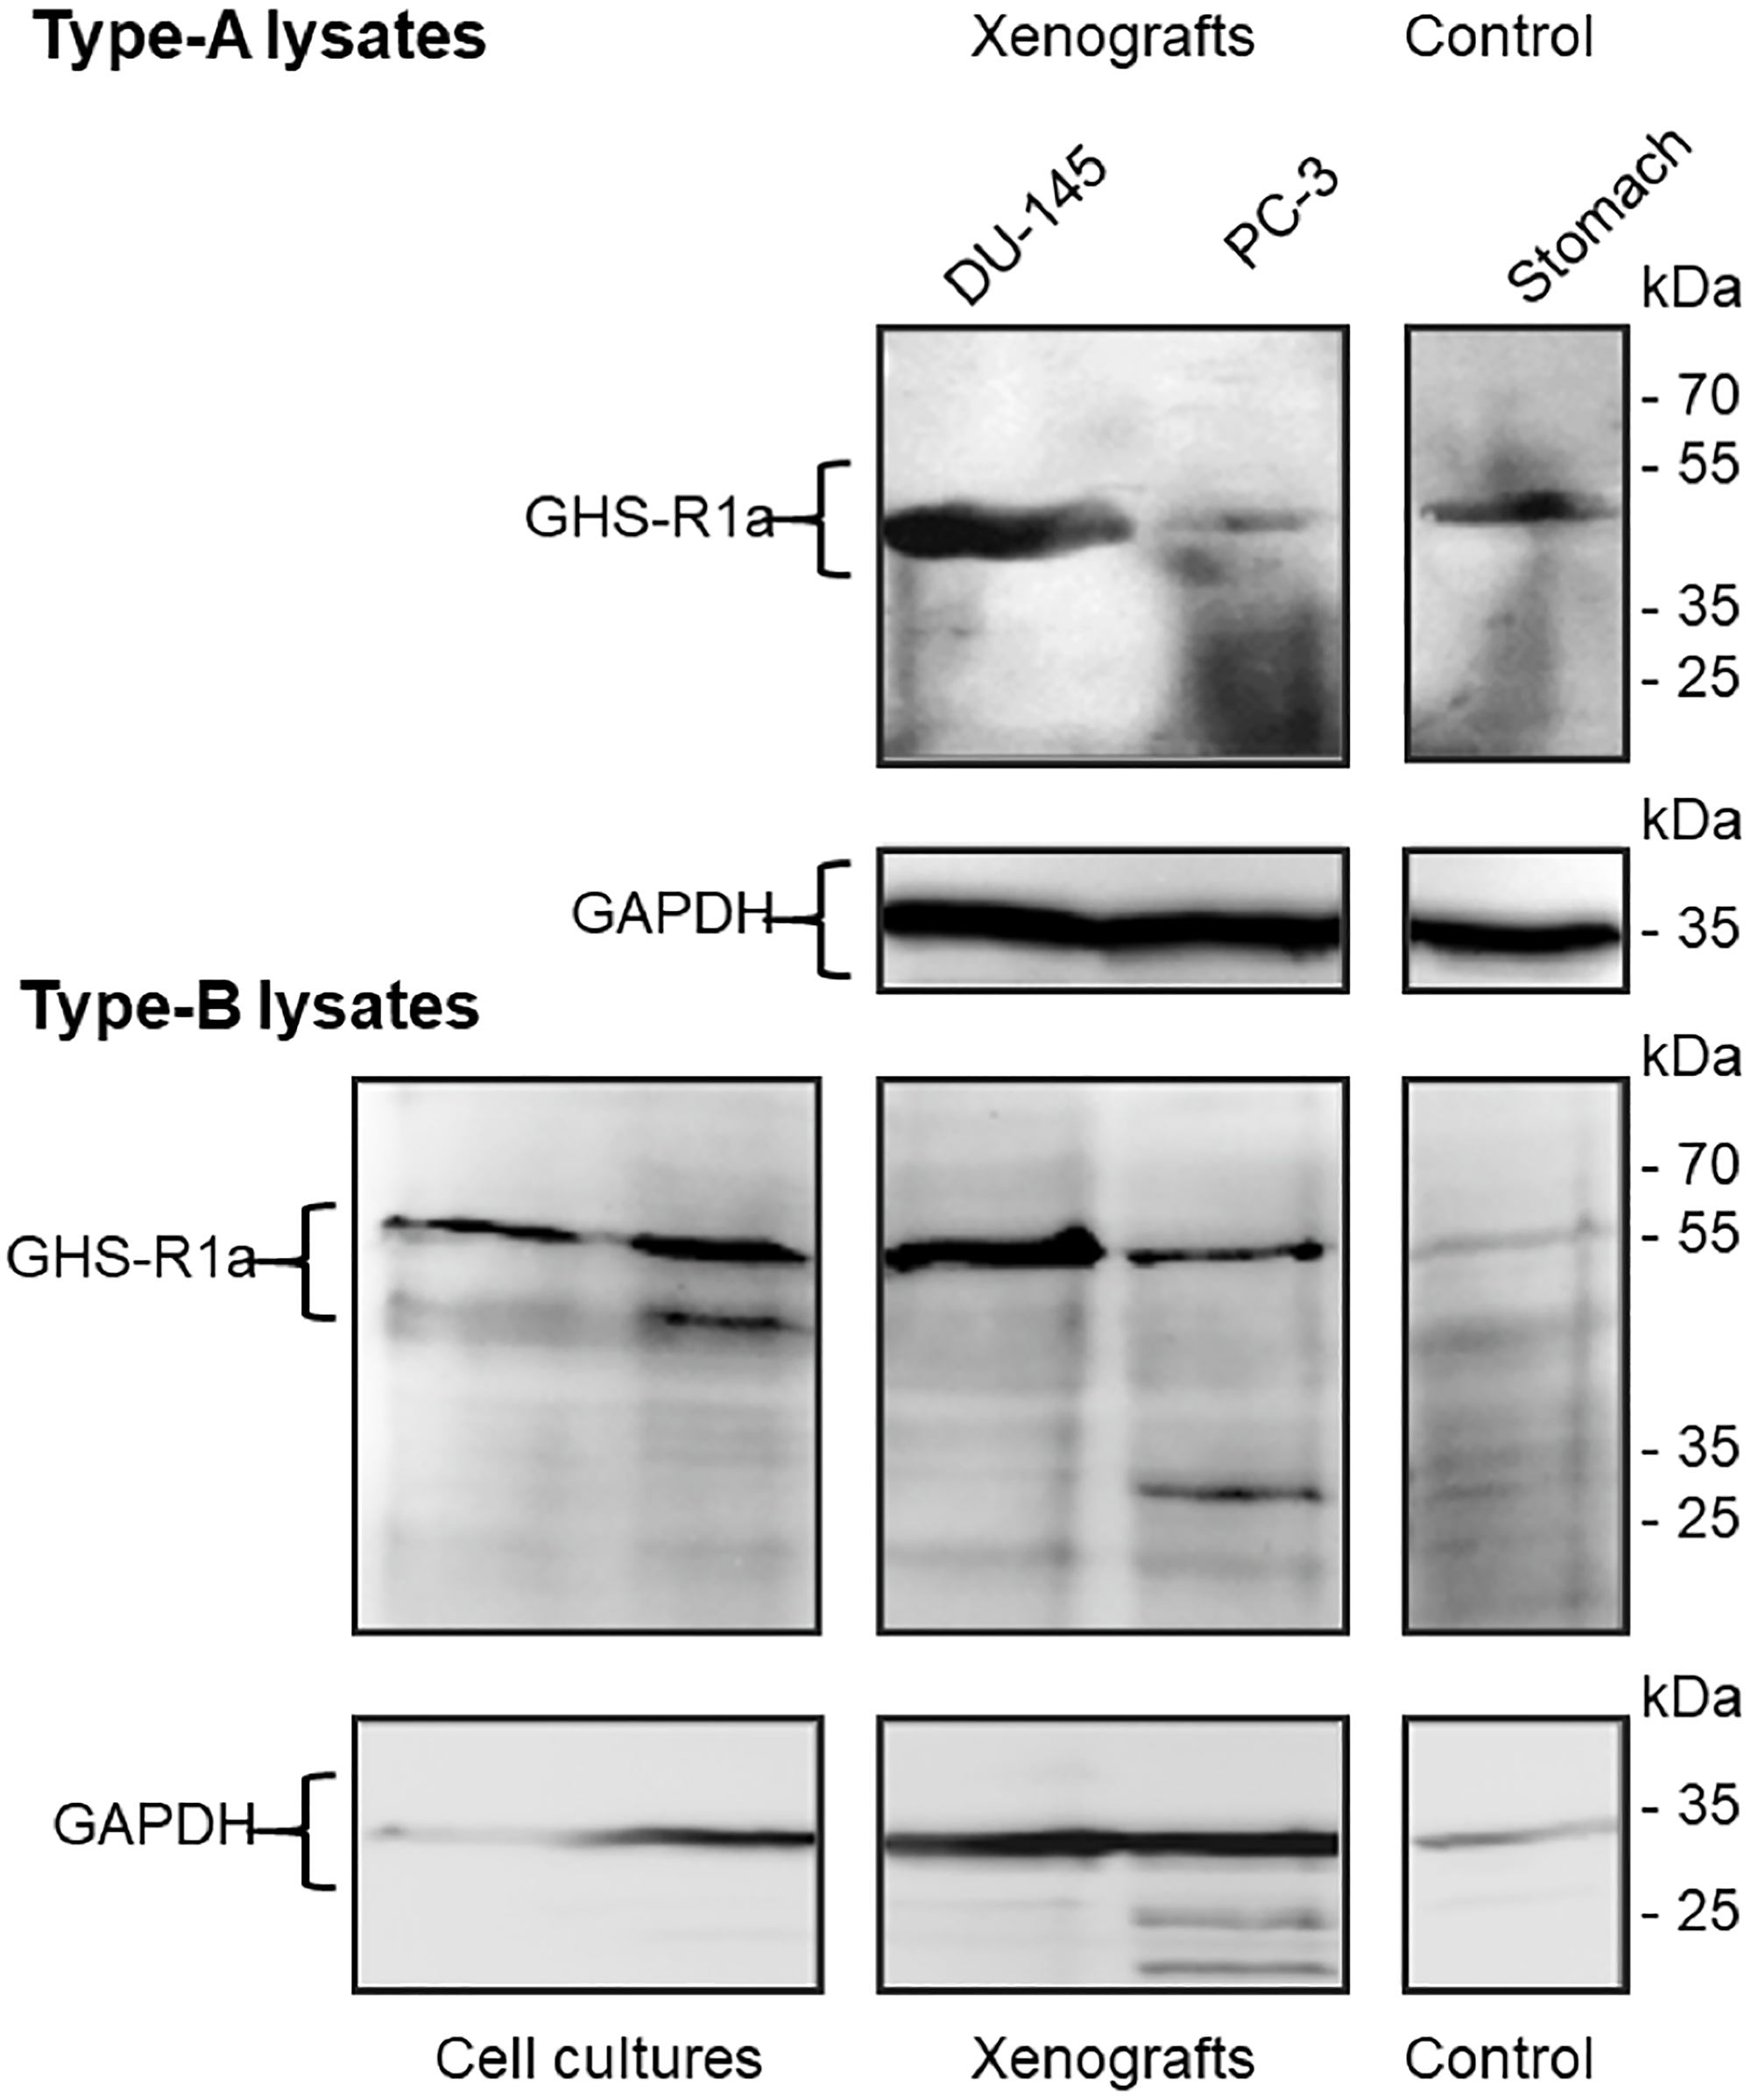 Figure 13: Immunoblots of GHS-R1a in lysates of DU-145 and PC-3 cell cultures, xenografts and Control.